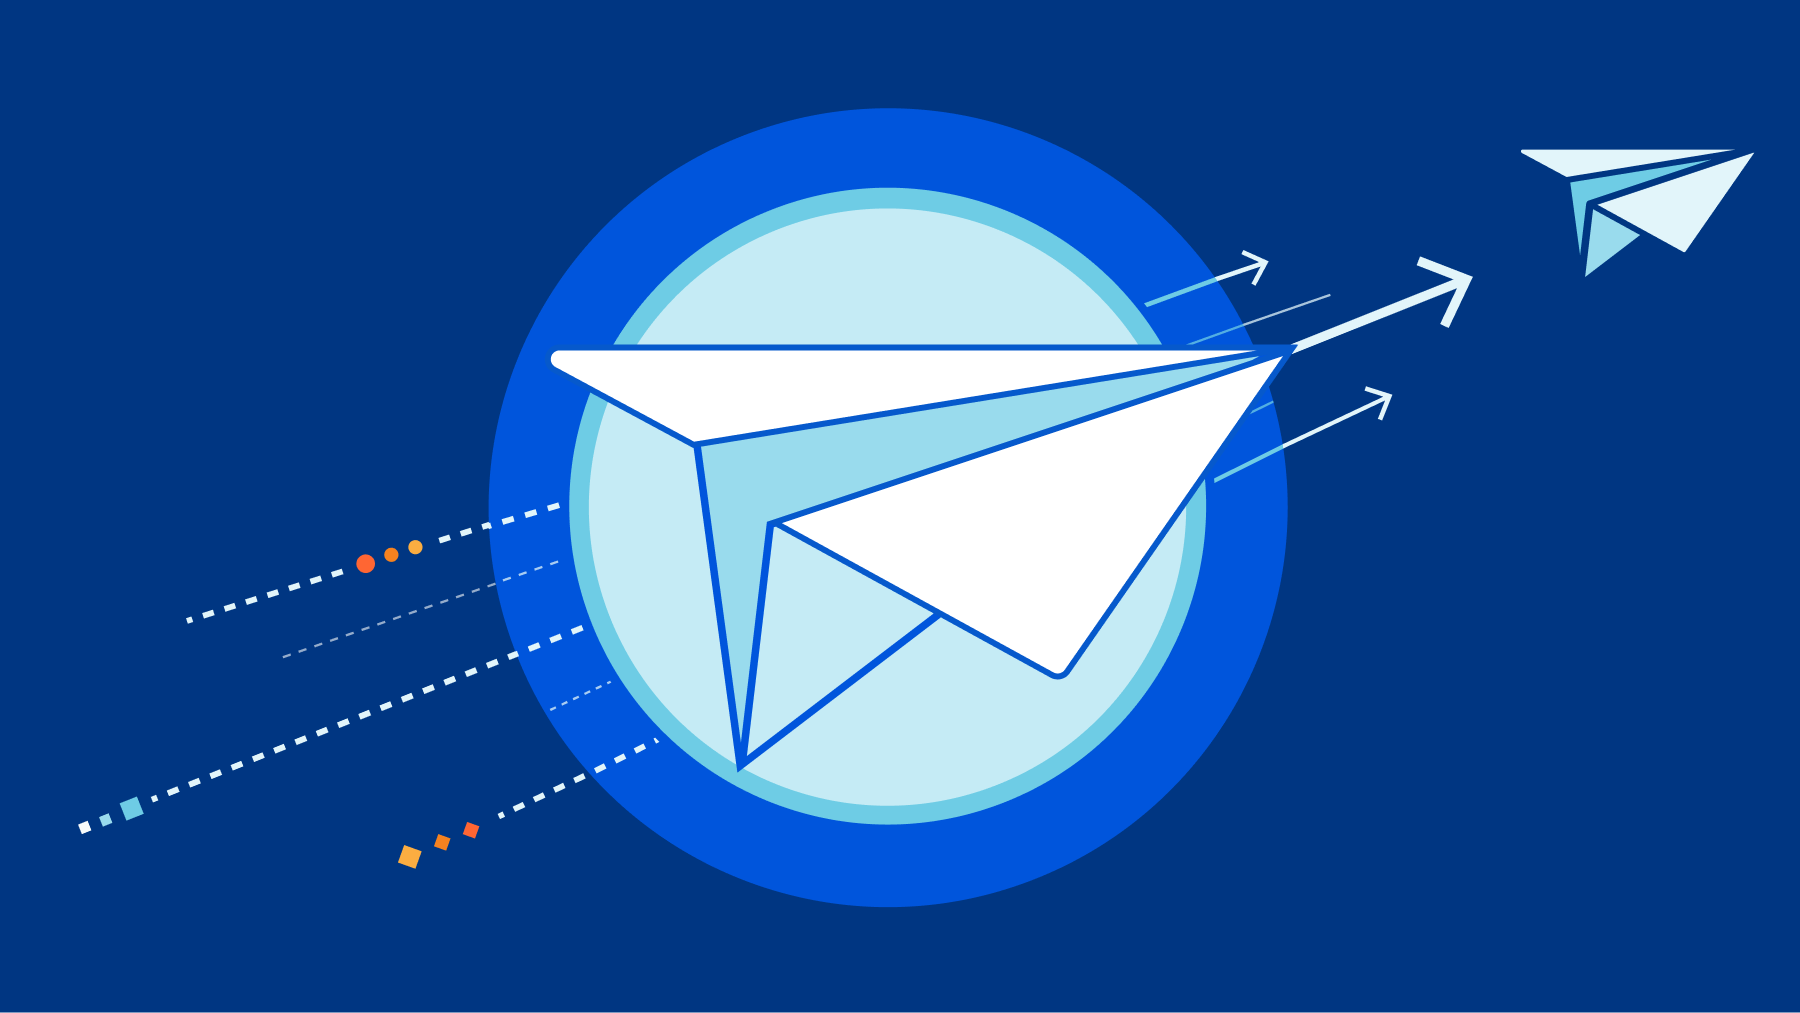 Cloudflare Email Routing - paper planes representing emails travel left to right